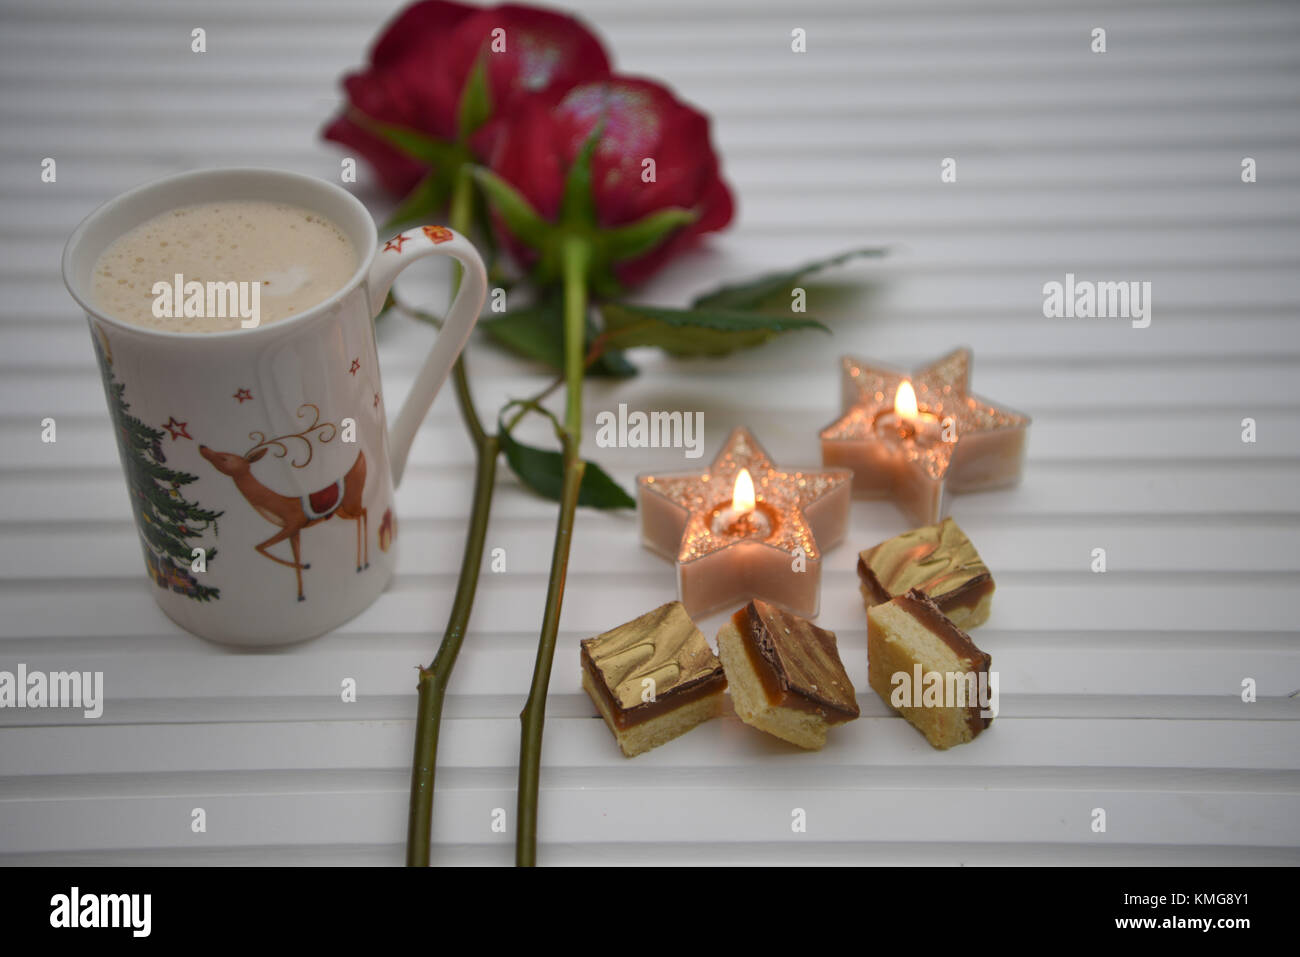 Christmas photography image with frothy hot drink in reindeer print mug with warm candles and luxury chocolate food on white wood background Stock Photo